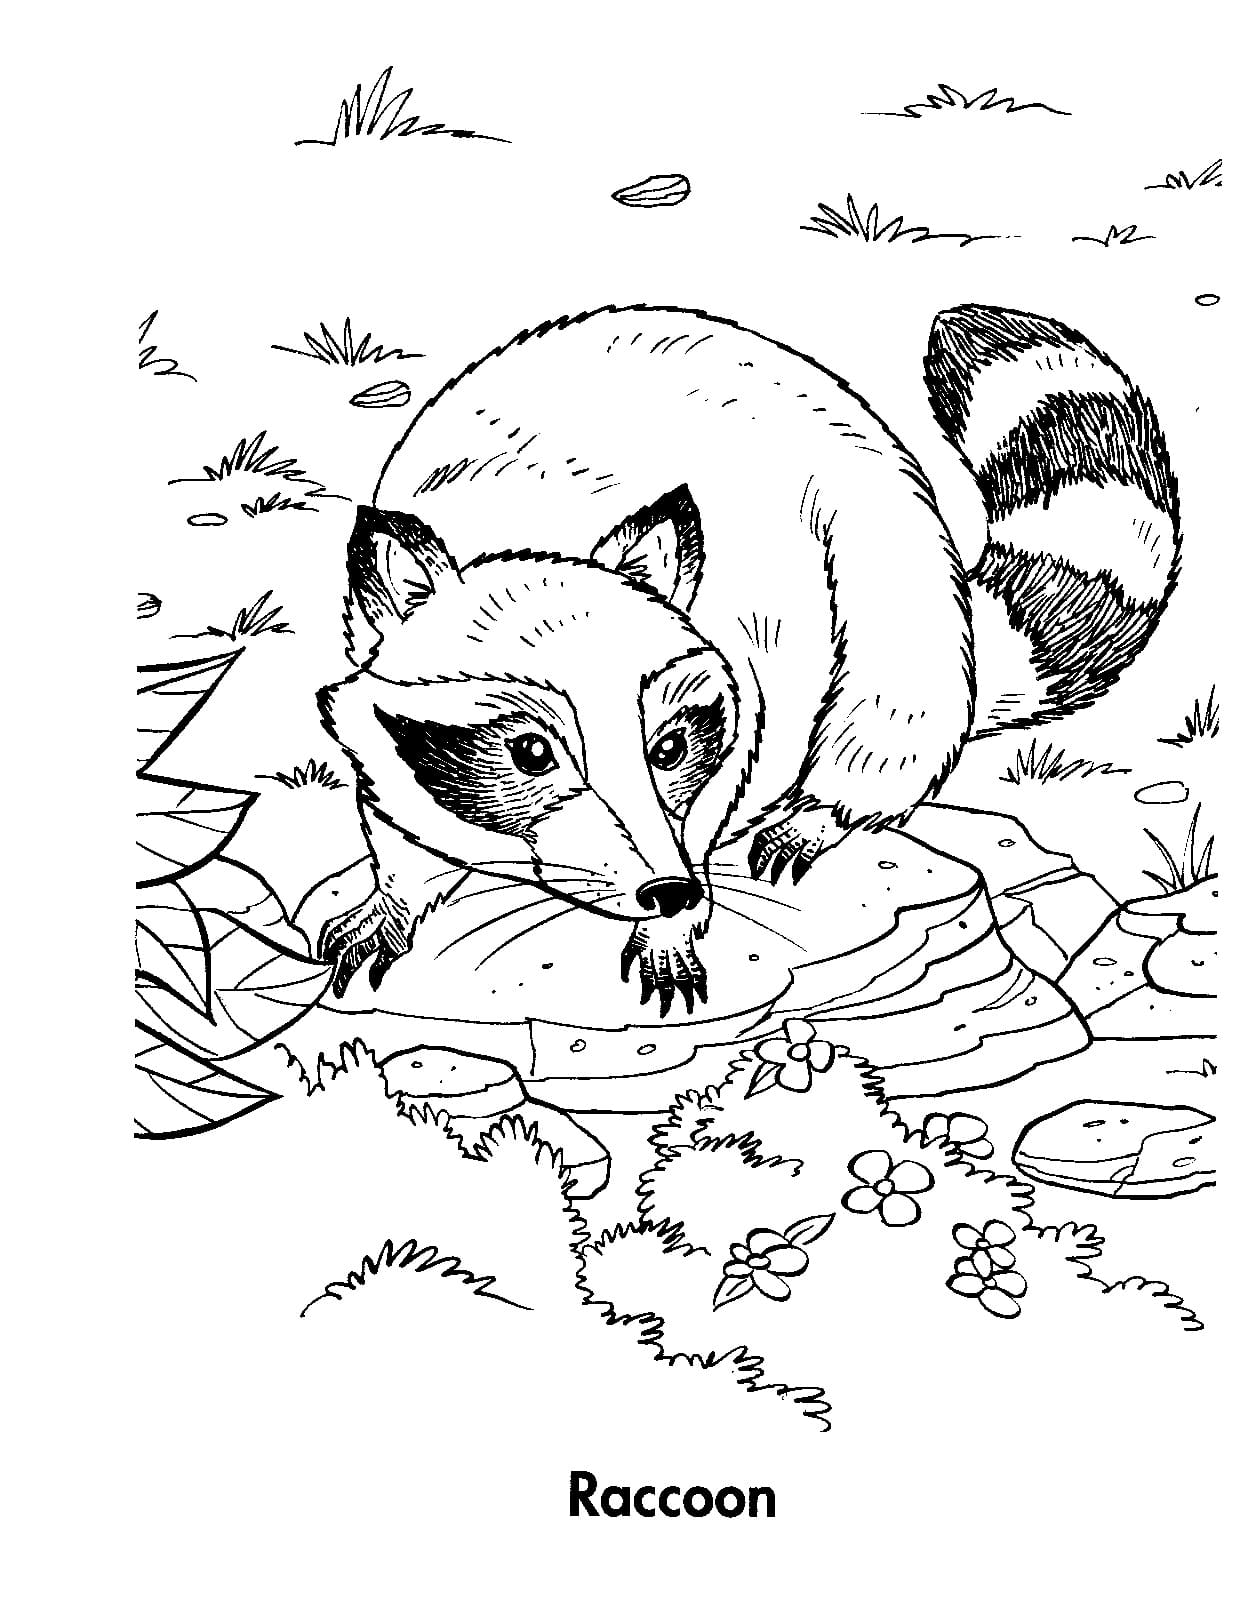 Raccoon Picture For Children